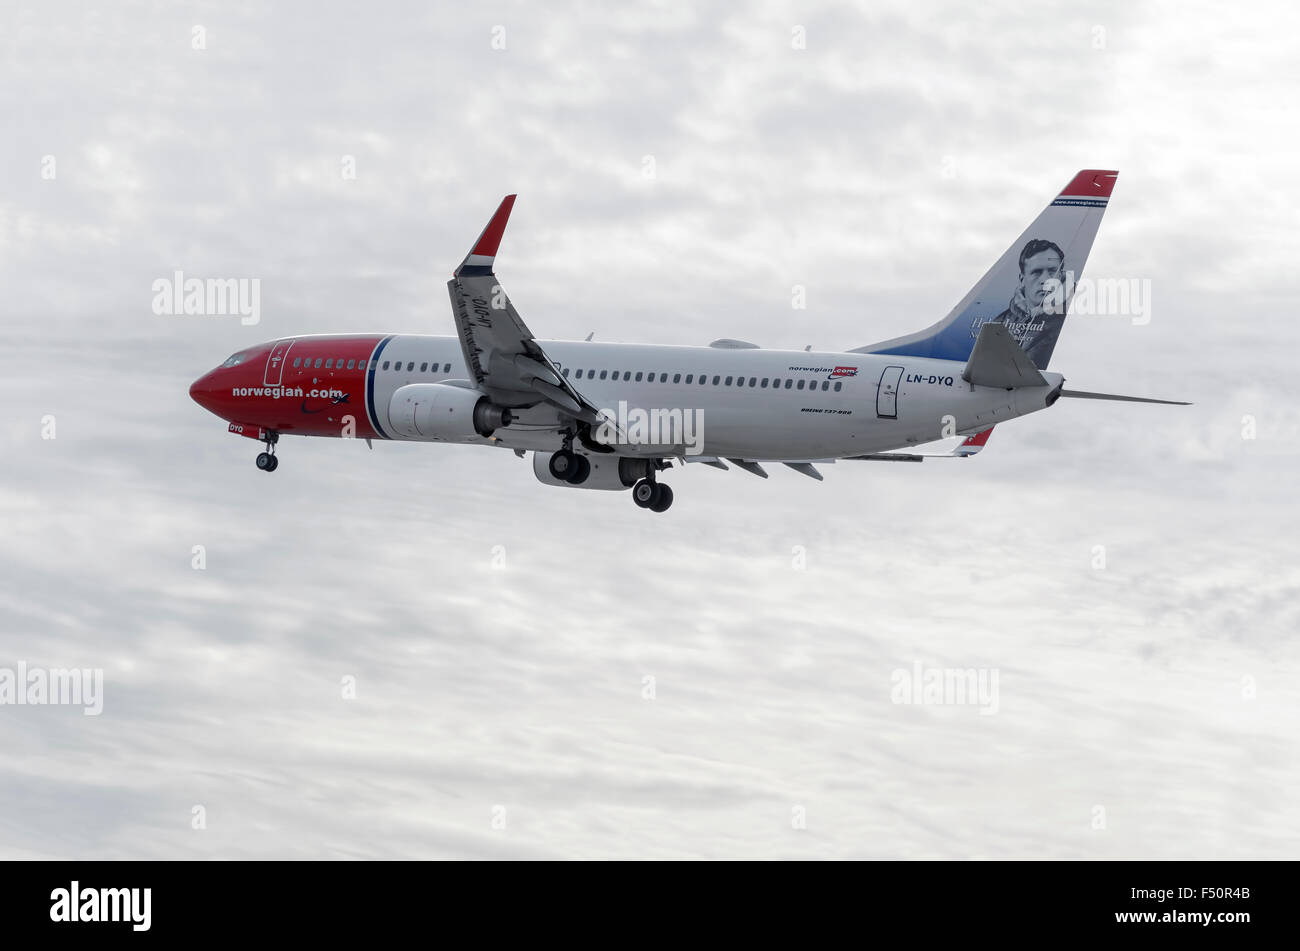 Aircraft -Boeing 737-8JP-, of -Norwegian (Helge Ingstad livery)- airline, is landing on Madrid-Barajas -Adolfo Suarez- airport. Stock Photo